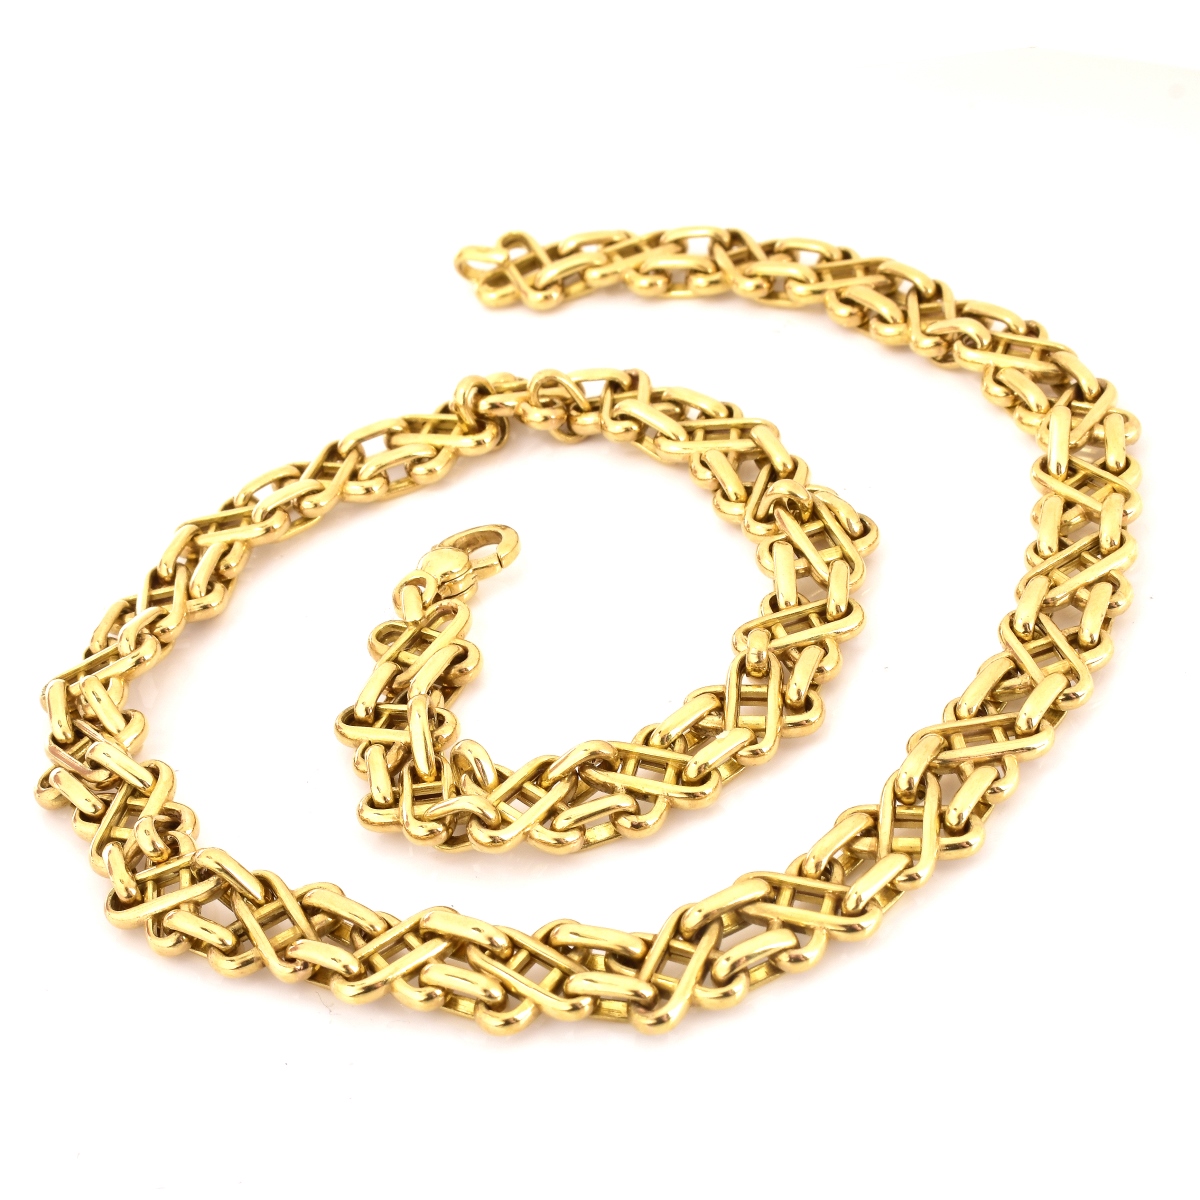 Tiffany & Co 18K Gold X Link Necklace